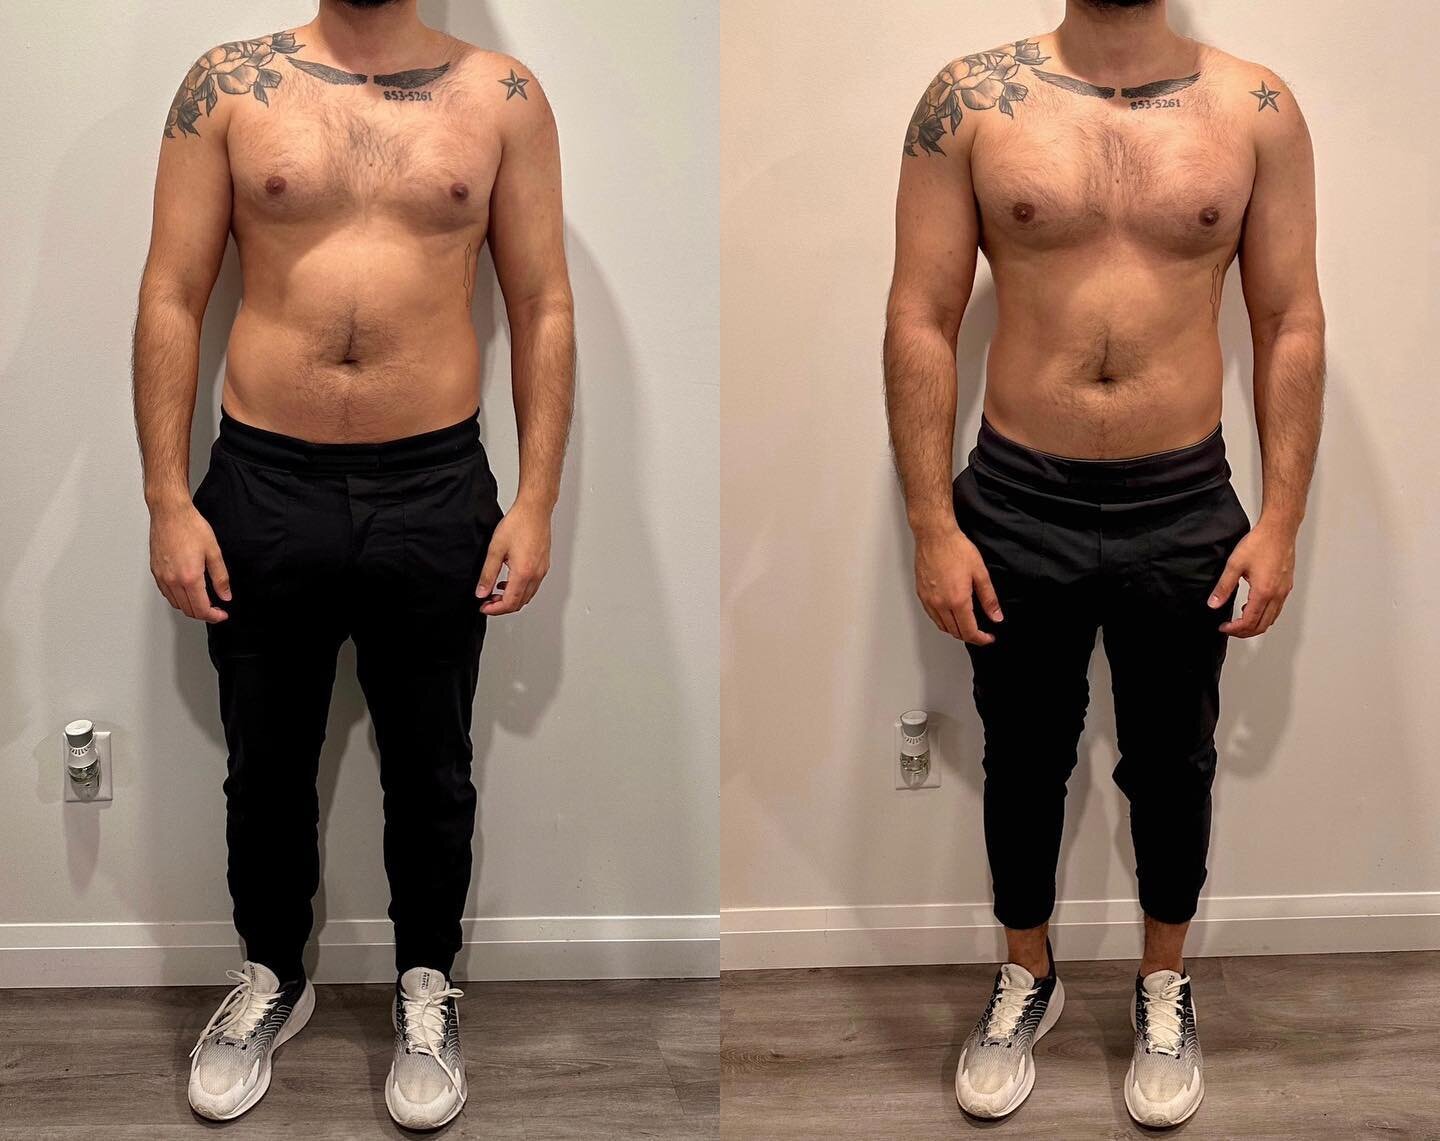 Another #30DAYTRANSFORMATION

𝙏𝙤 𝙘𝙝𝙖𝙣𝙜𝙚 𝙮𝙤𝙪𝙧 𝙗𝙤𝙙𝙮, 𝙮𝙤𝙪 𝙢𝙪𝙨𝙩 𝙛𝙞𝙧𝙨𝙩 𝙘𝙝𝙖𝙣𝙜𝙚 𝙮𝙤𝙪𝙧 𝙢𝙞𝙣𝙙.

Amazing progress from my client who&rsquo;s been grinding for just 30 days!! 

#onemorereplondon #transformationtuesday #fi